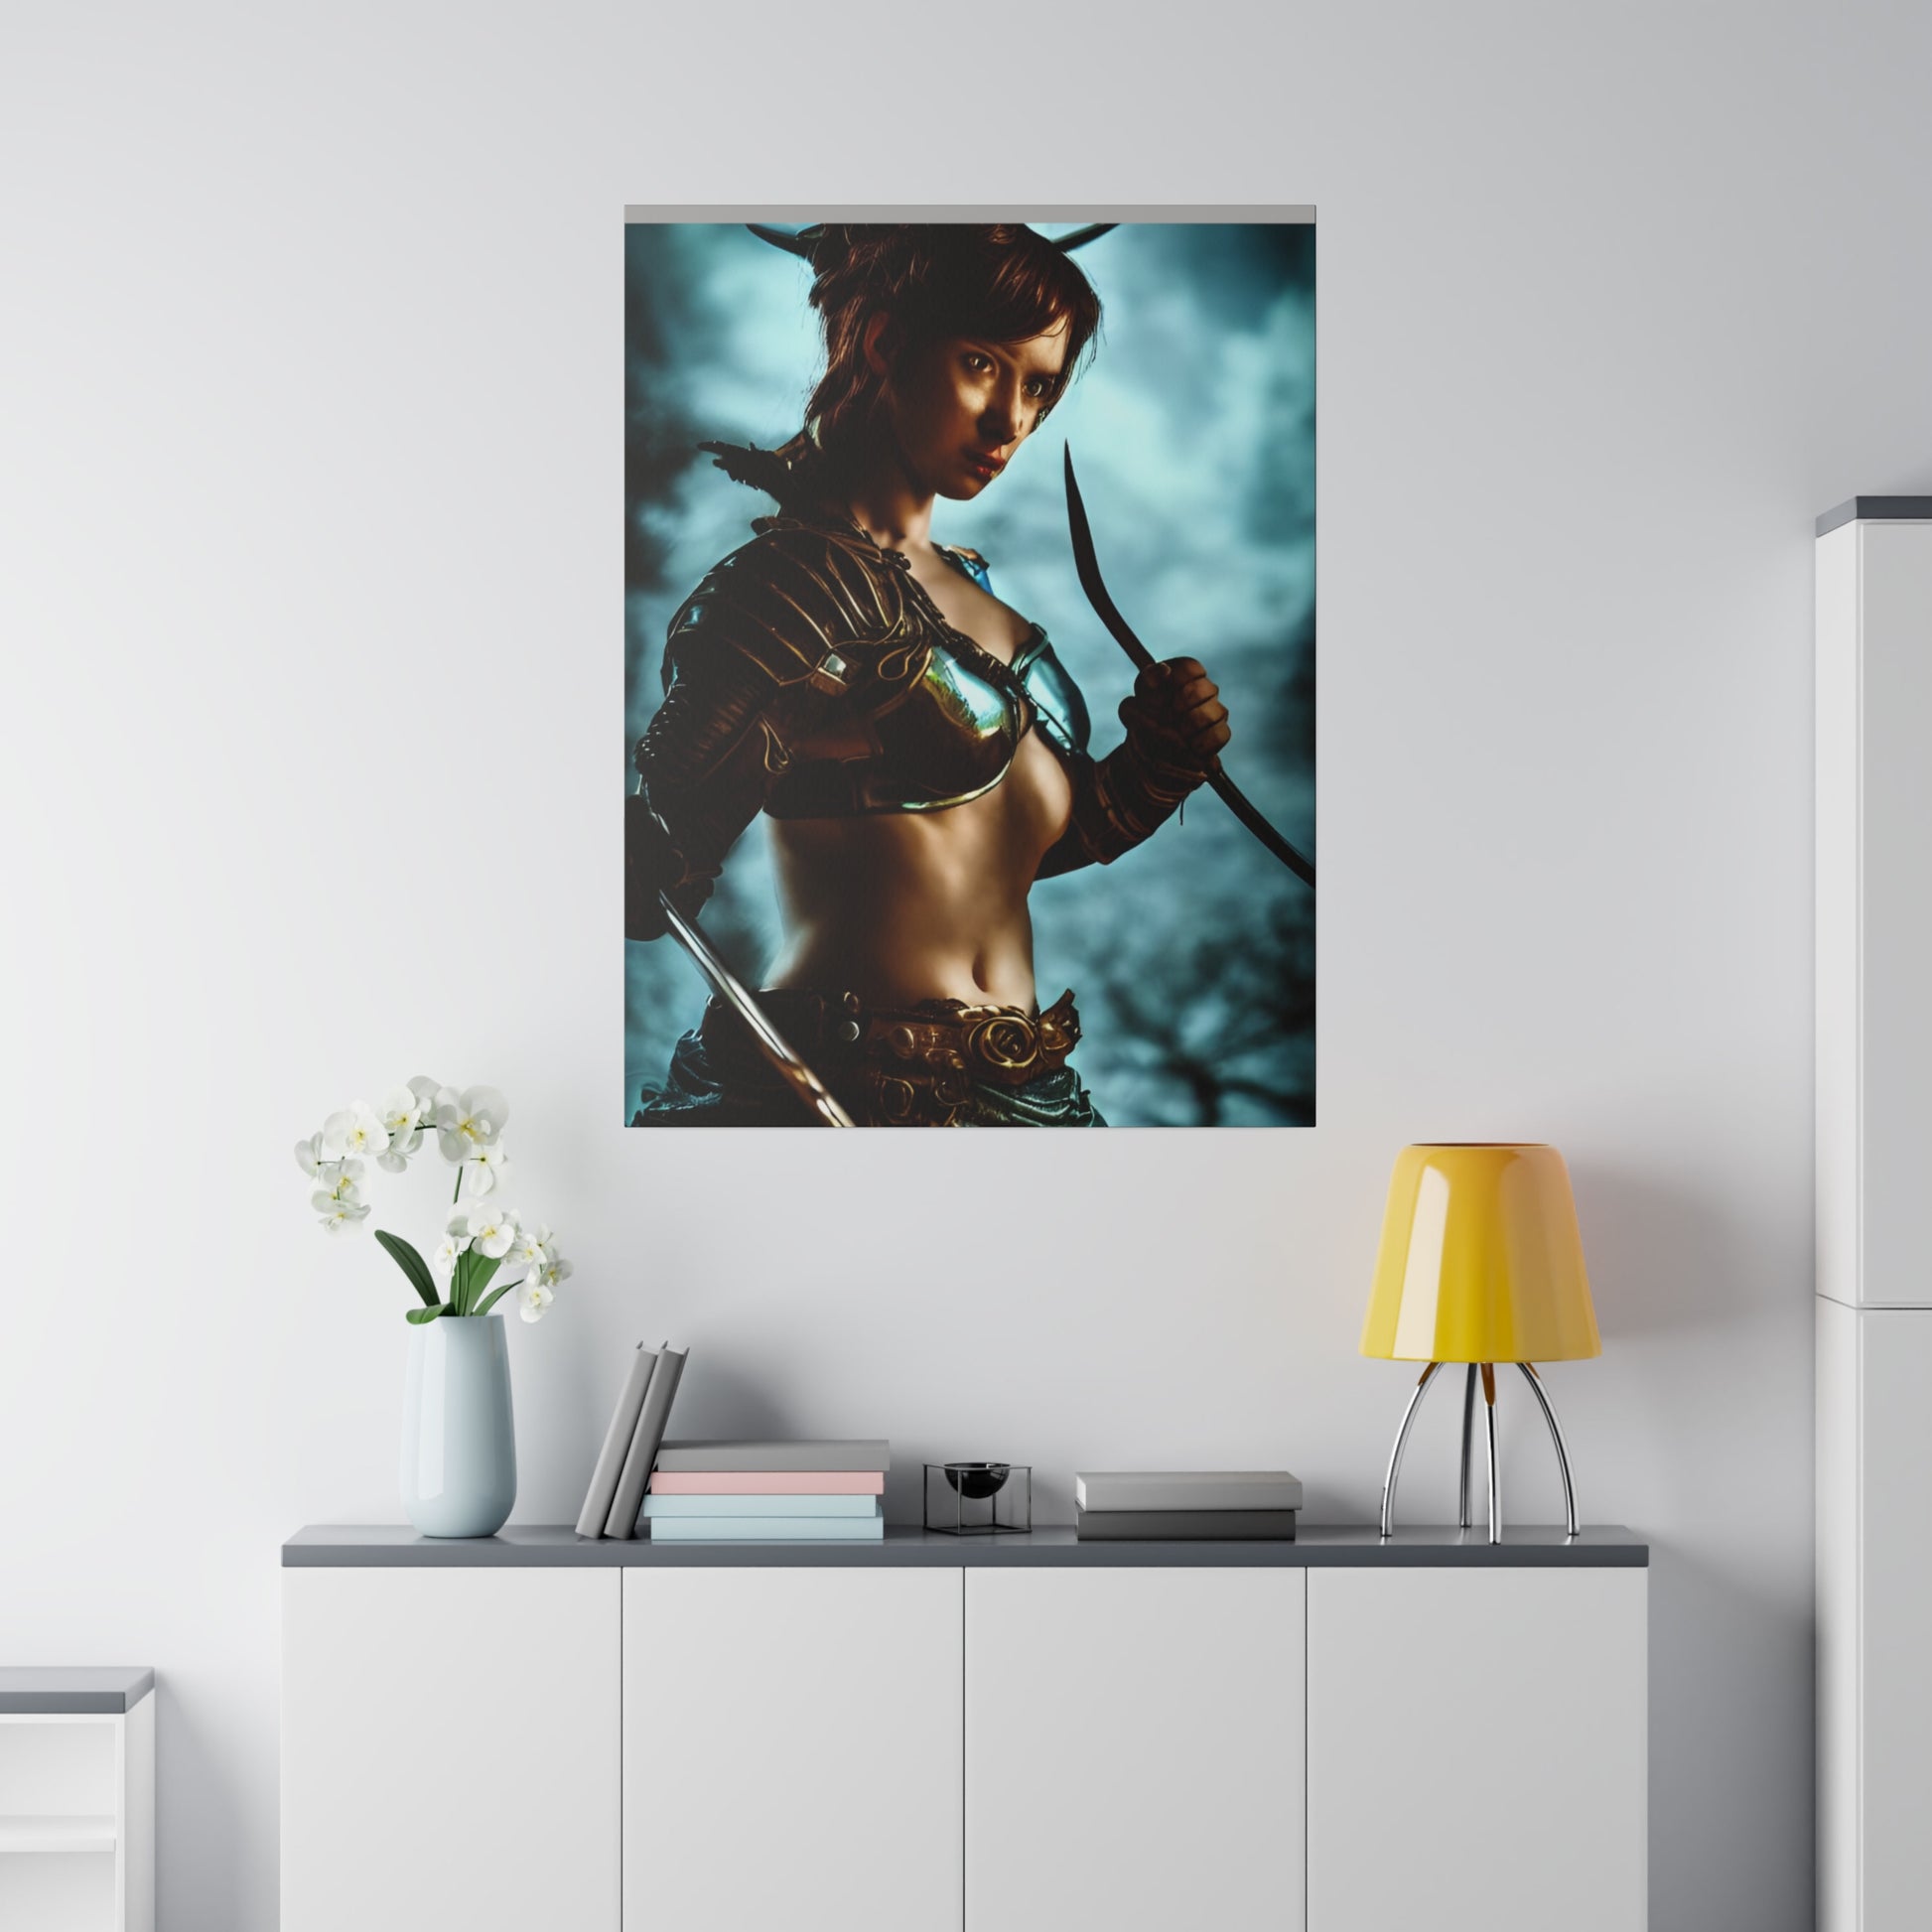 Transform spaces with our Women of Fantasy canvas print—a captivating blend of digital artistry, dark fantasy allure, and empowering depictions of women. Elevate your decor with enchantment.